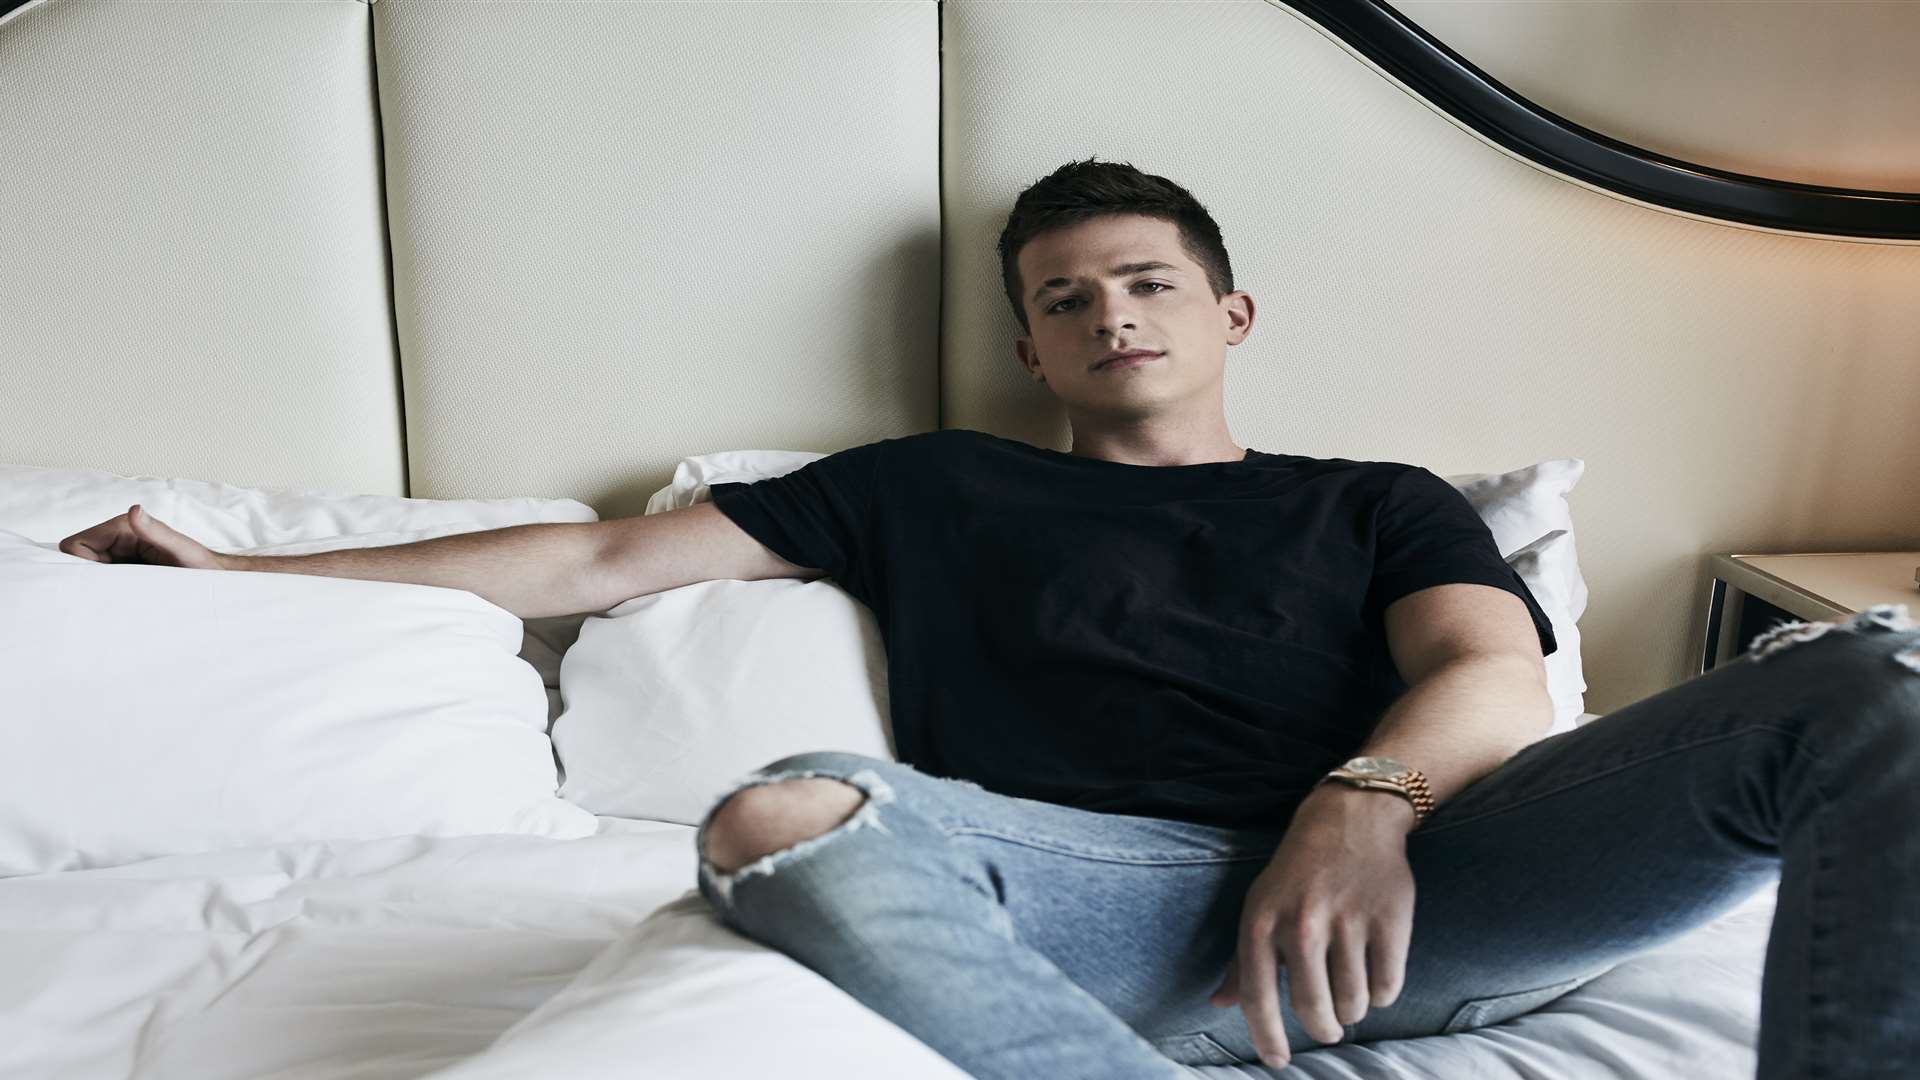 Charlie Puth will be on kmfm's Hit List Picture: Jimmy Fontaine